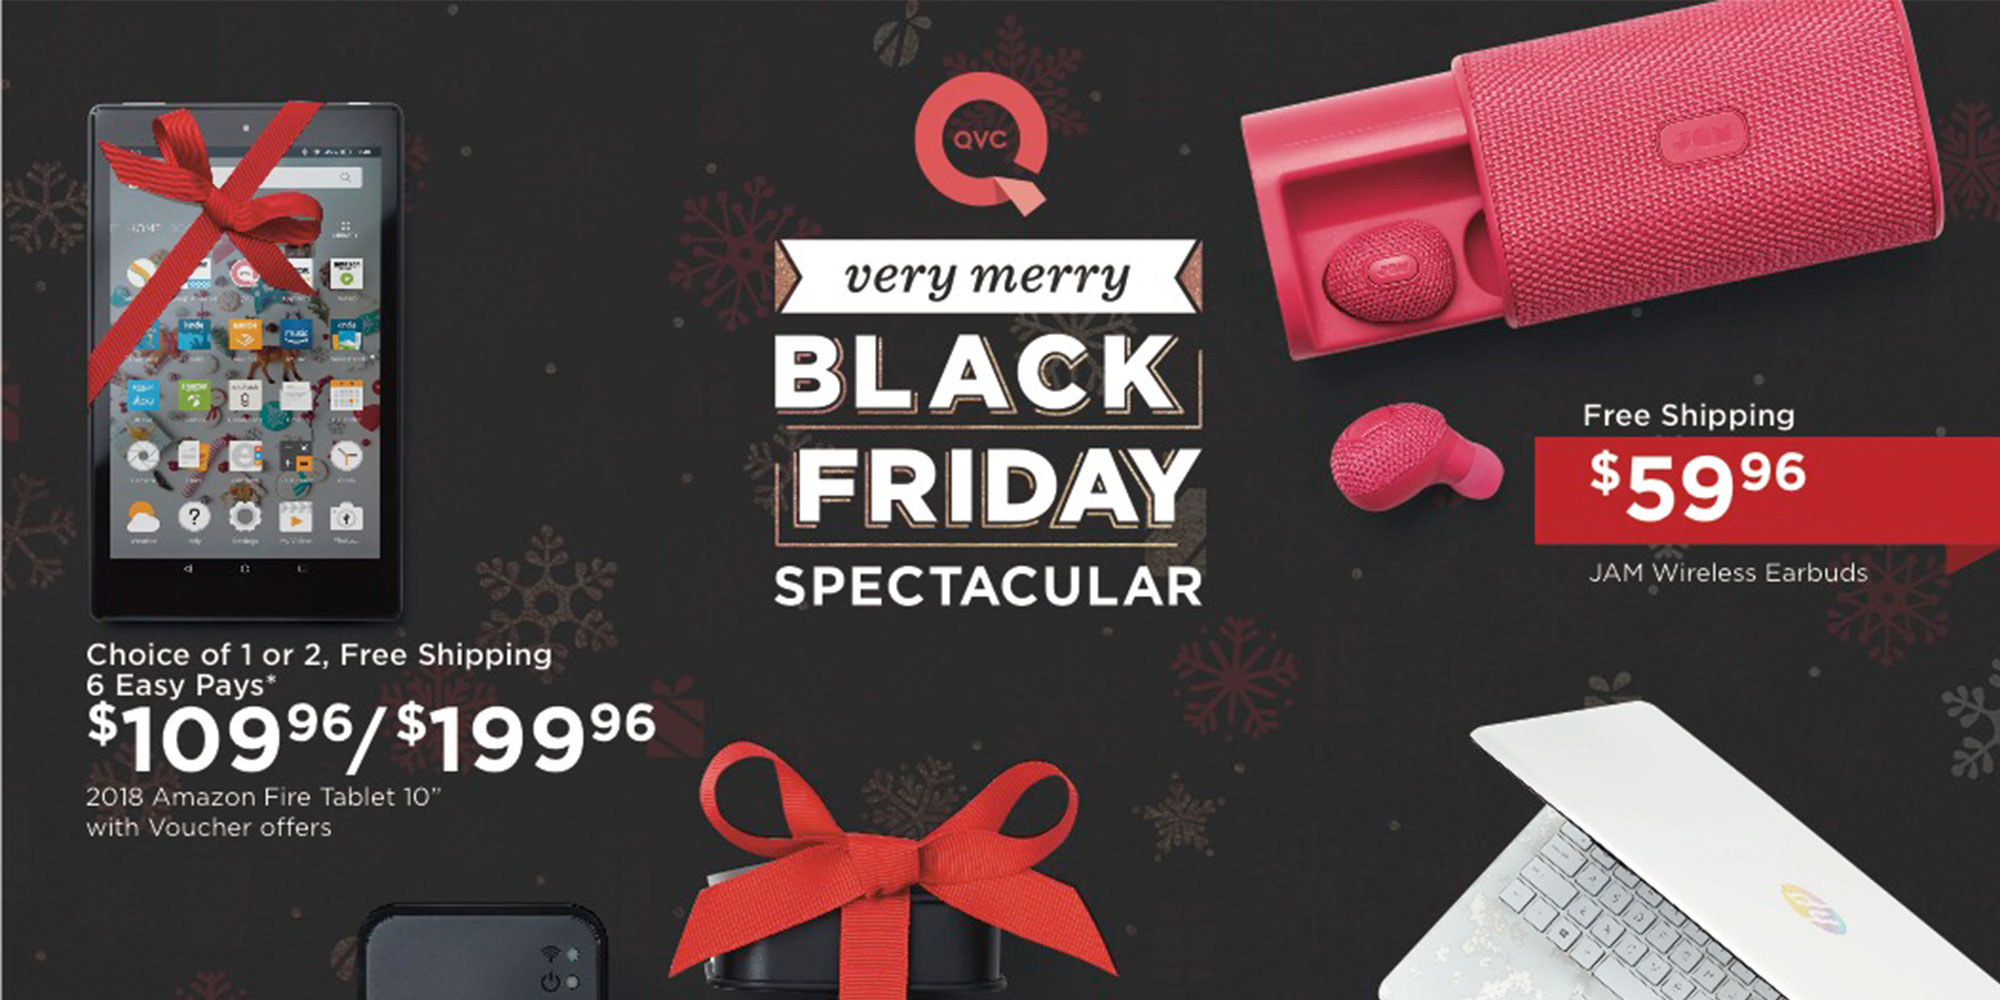 The QVC Black Friday ad features two Echos for 100, more 9to5Toys